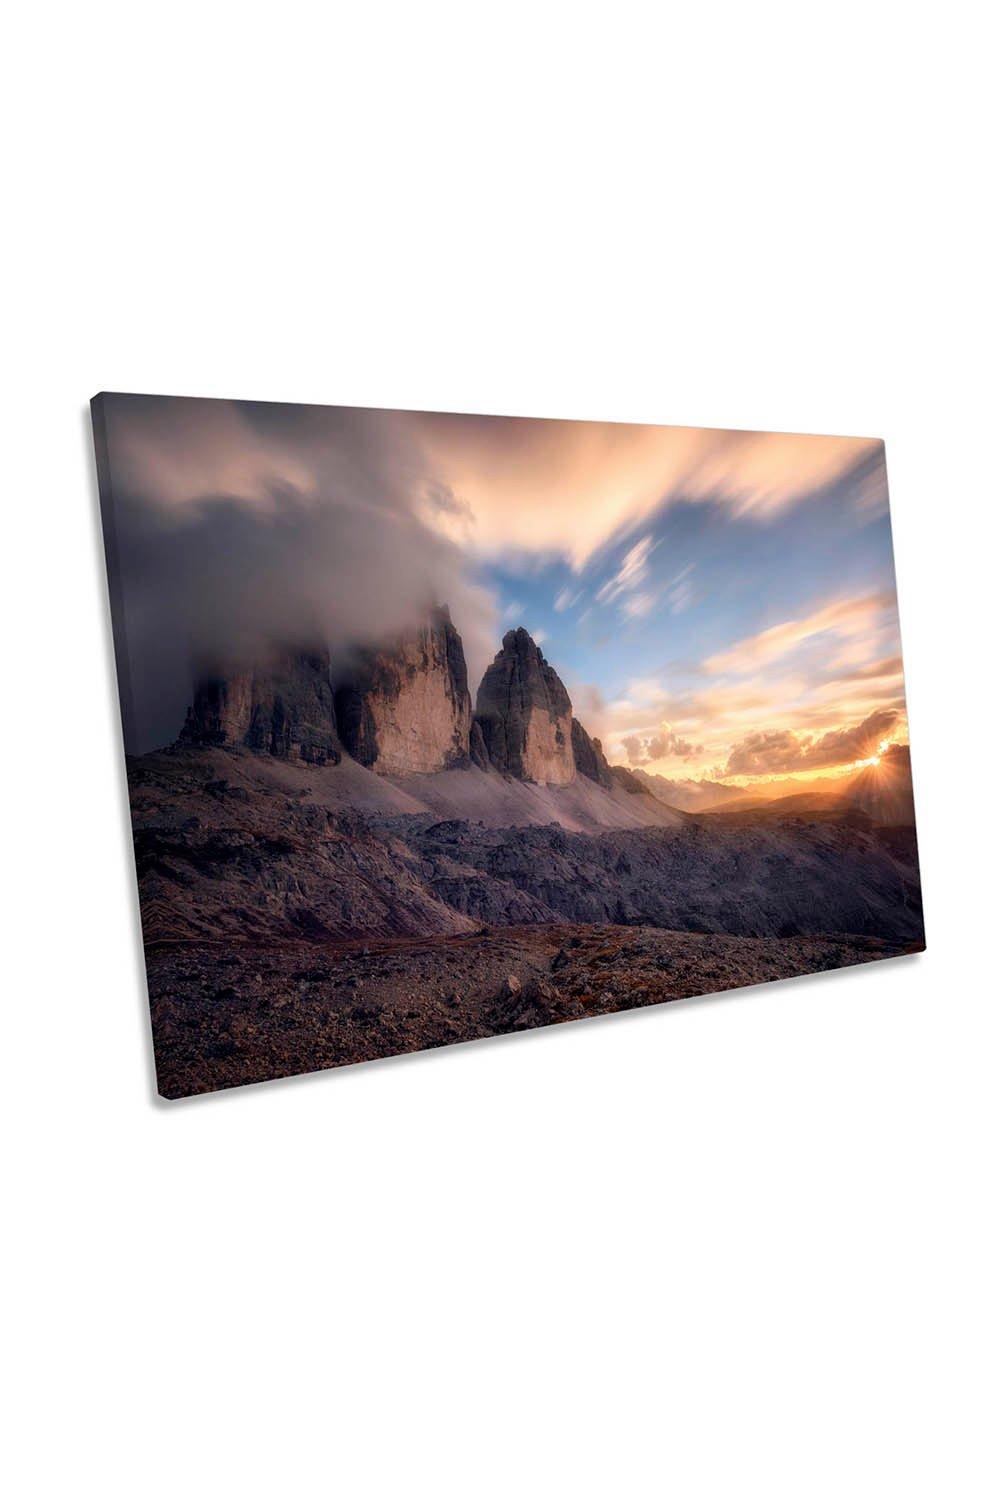 The Final Moment Mountains Landscape Canvas Wall Art Picture Print